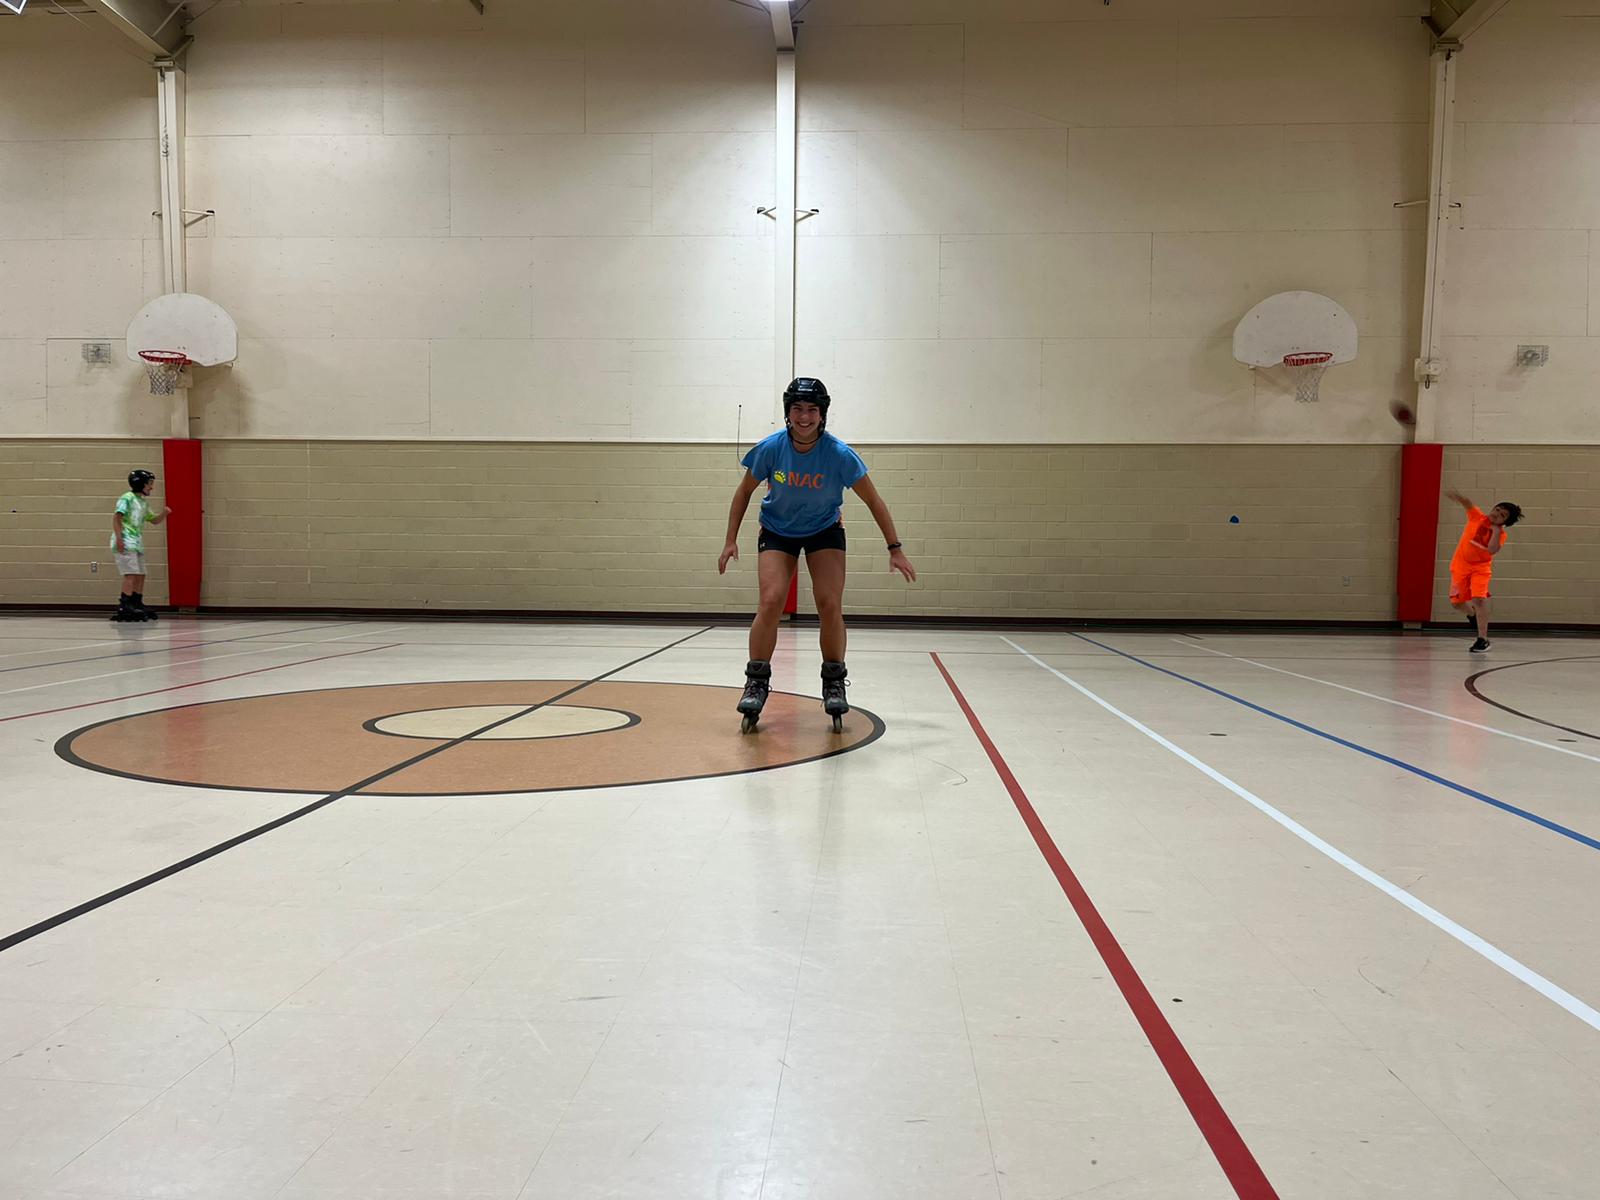 Skating in the gym